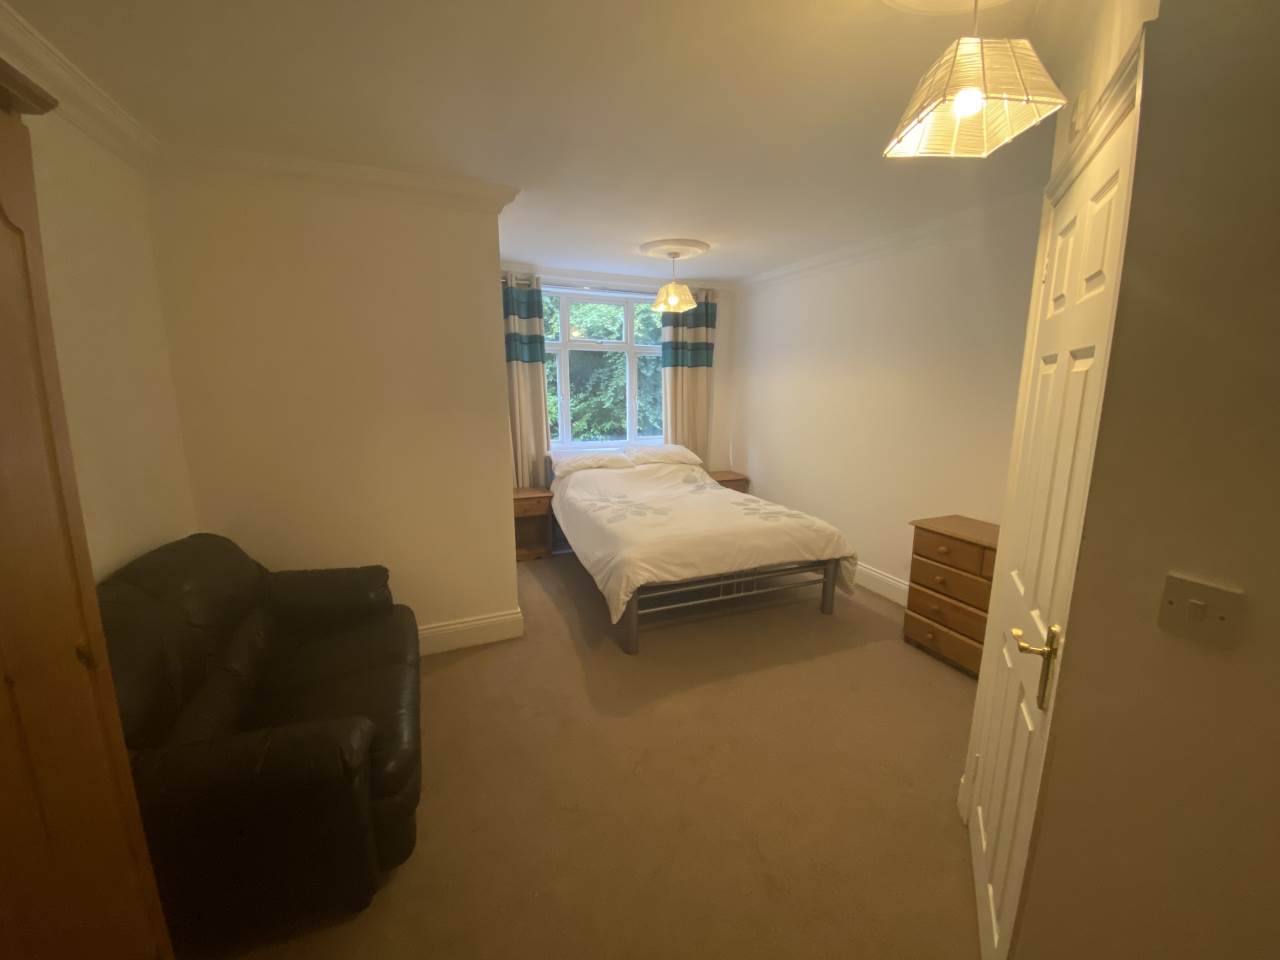 1 bed house / flat share to rent in Caversham Place (with ensuite), Sutton Coldfield 0